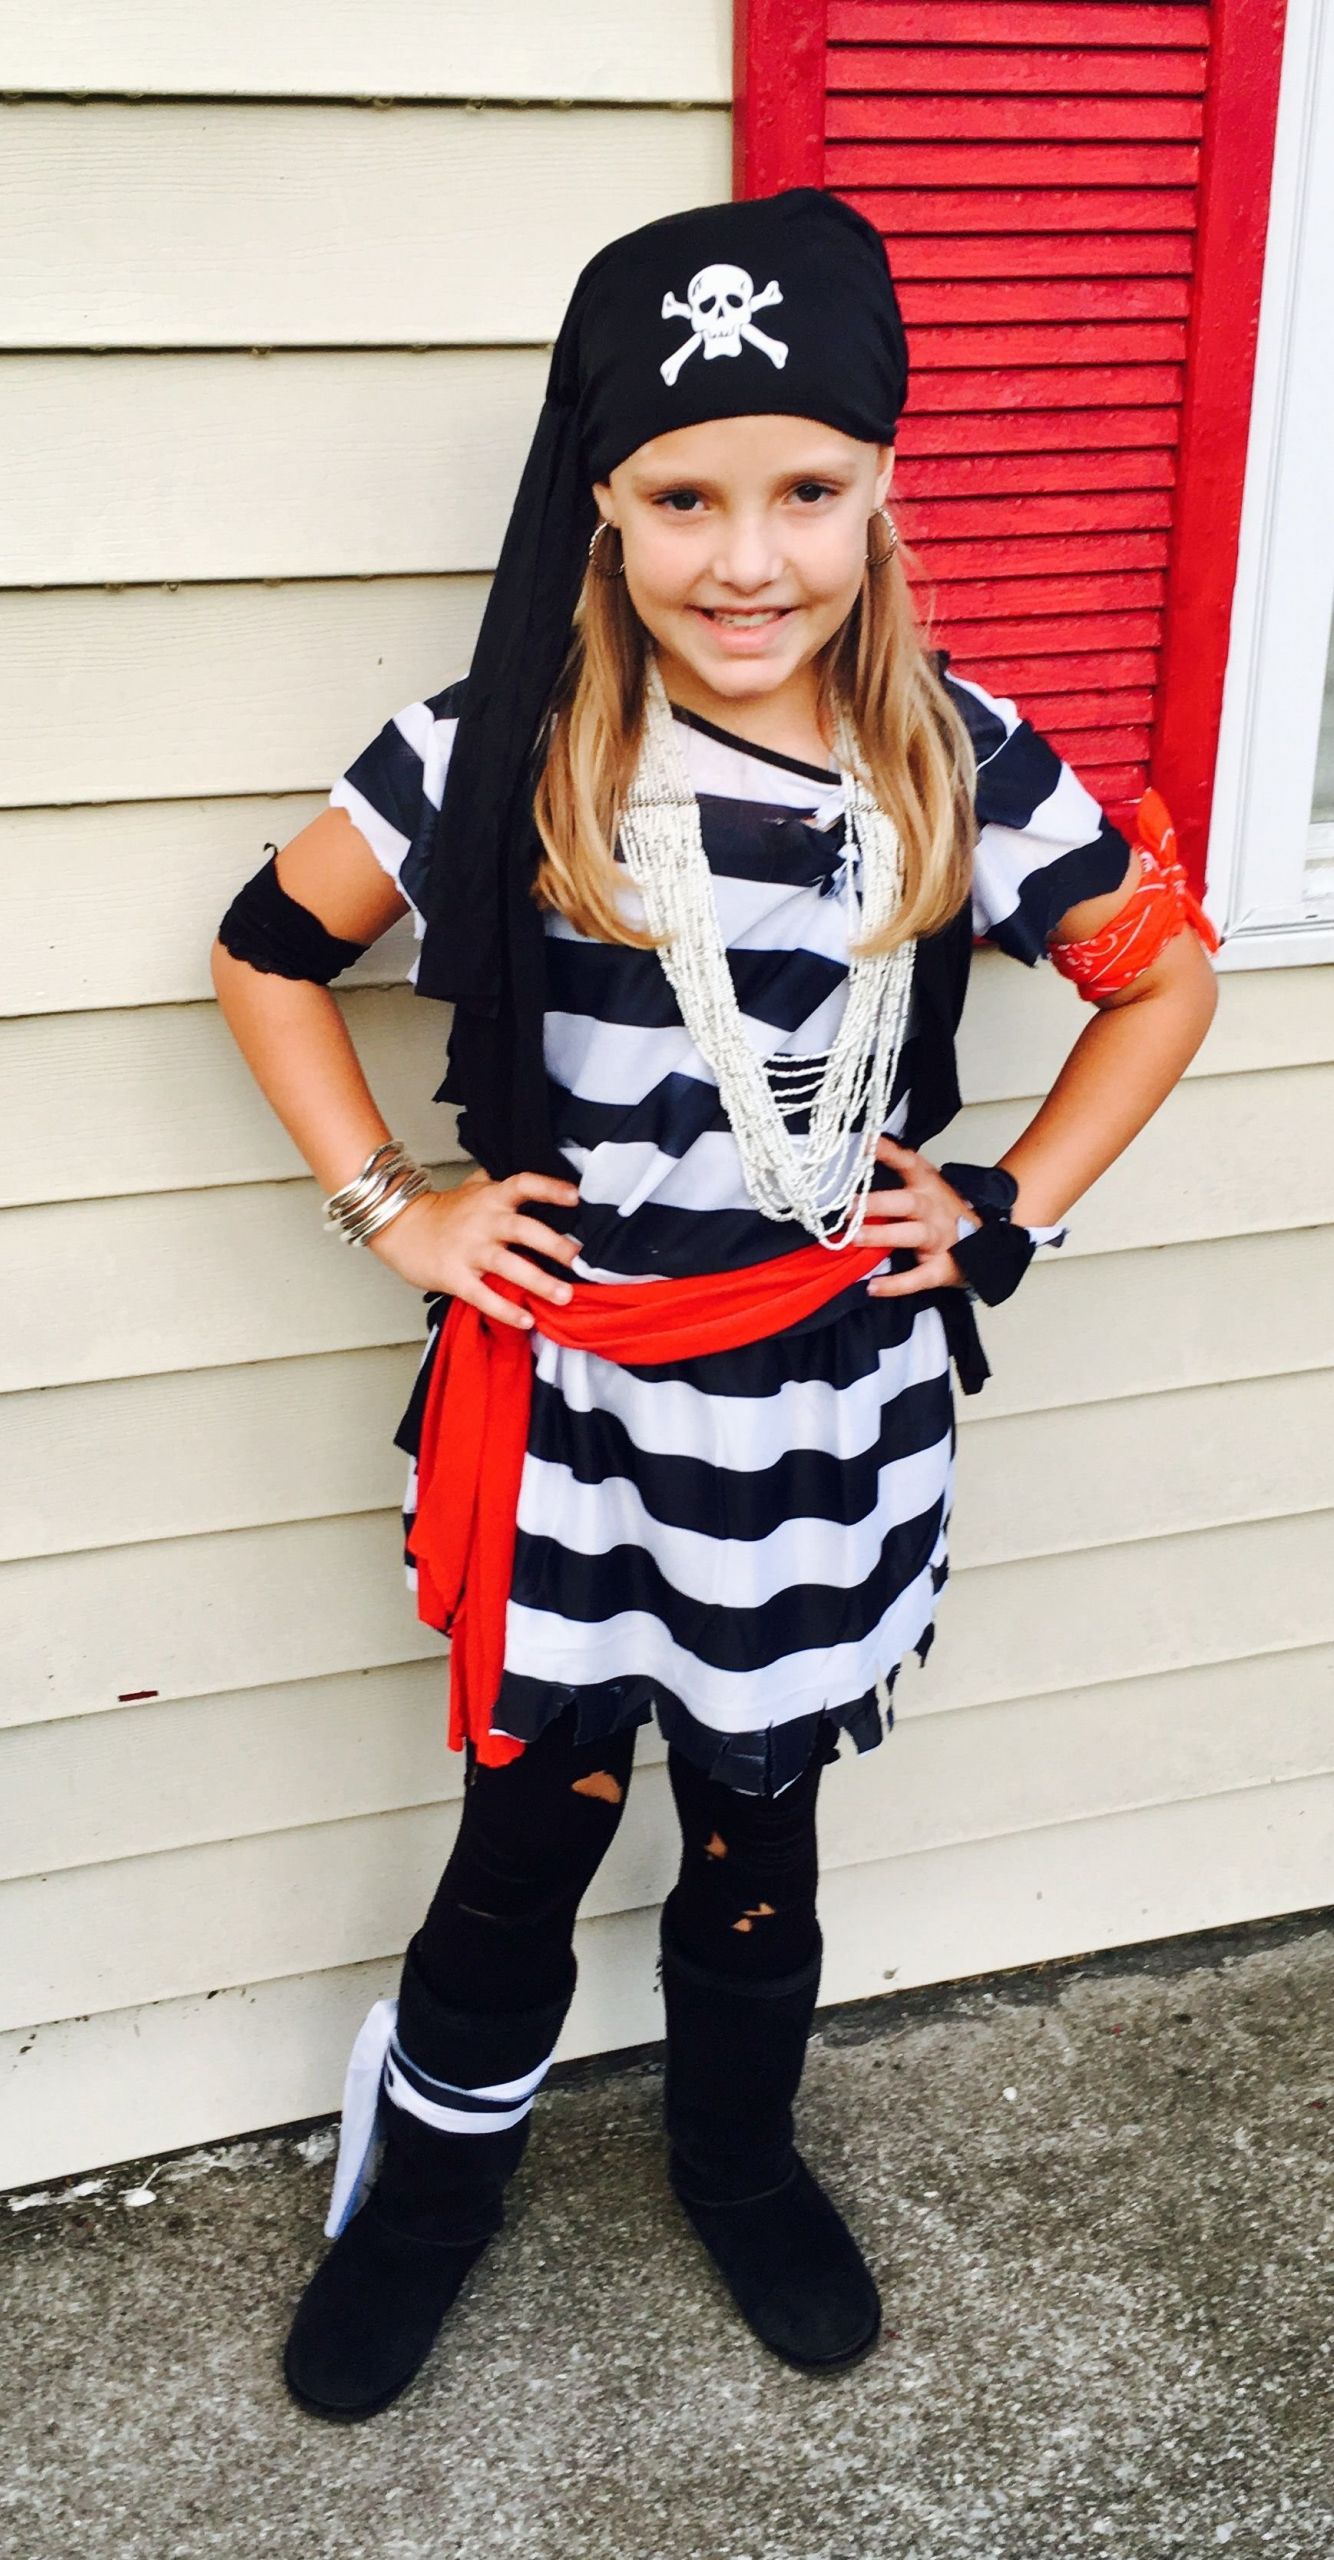 DIY Costumes Kids
 10 Attractive Homemade Pirate Costume Ideas For Kids 2019